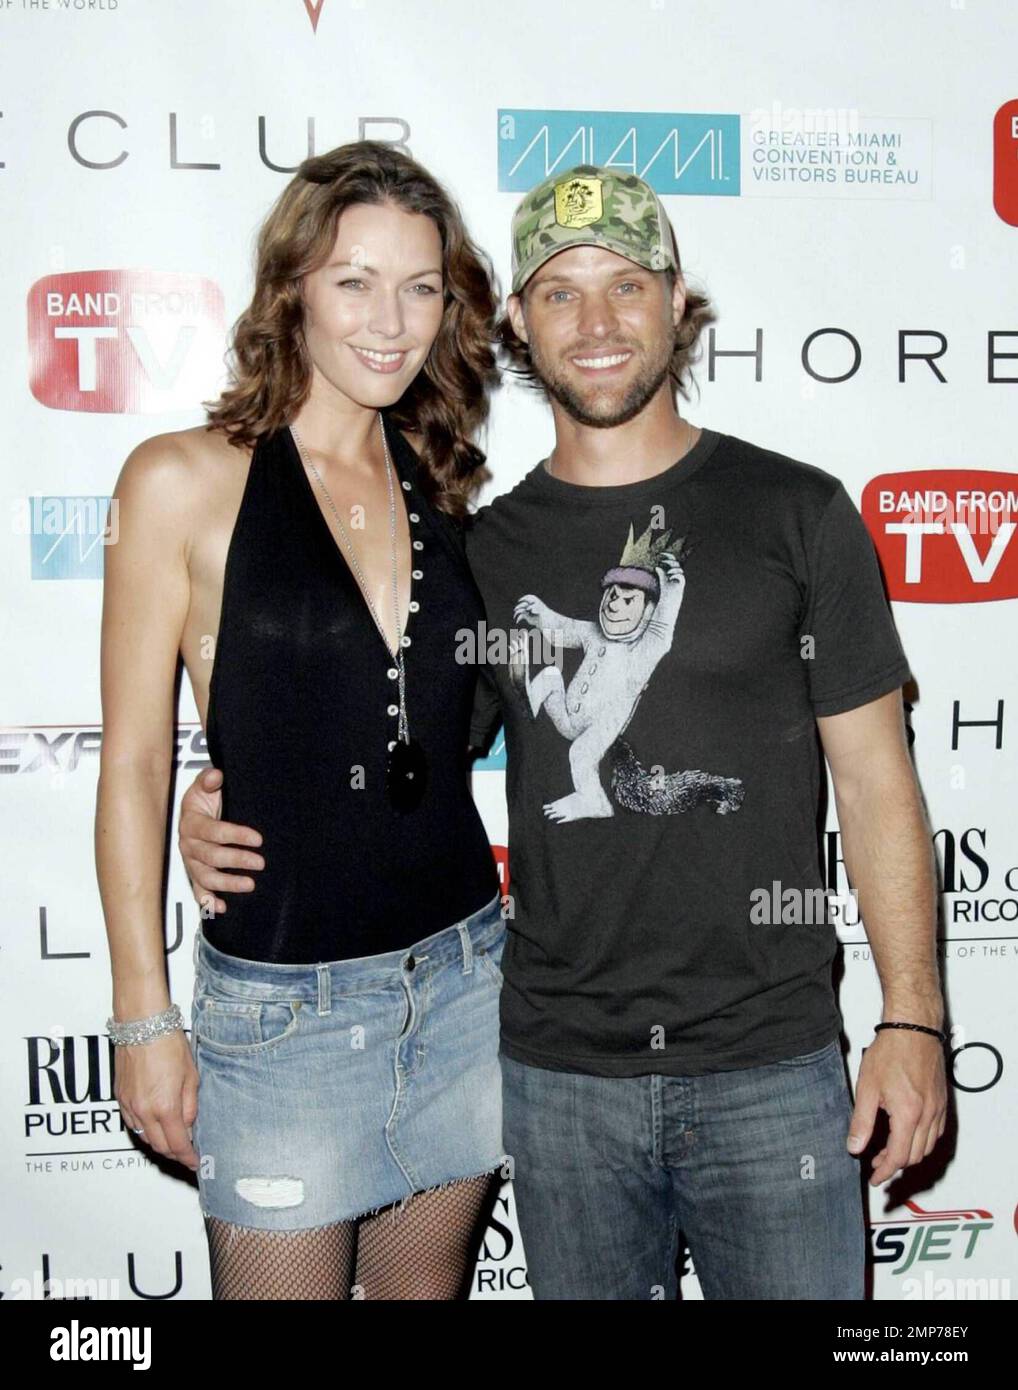 Jesse Spencer and girlfriend and fellow bandmate, Louise Griffiths, walk the red carpet at "A Concert for Charity" at the Shore Club in Miami Beach, FL. 5/16/09. Stock Photo